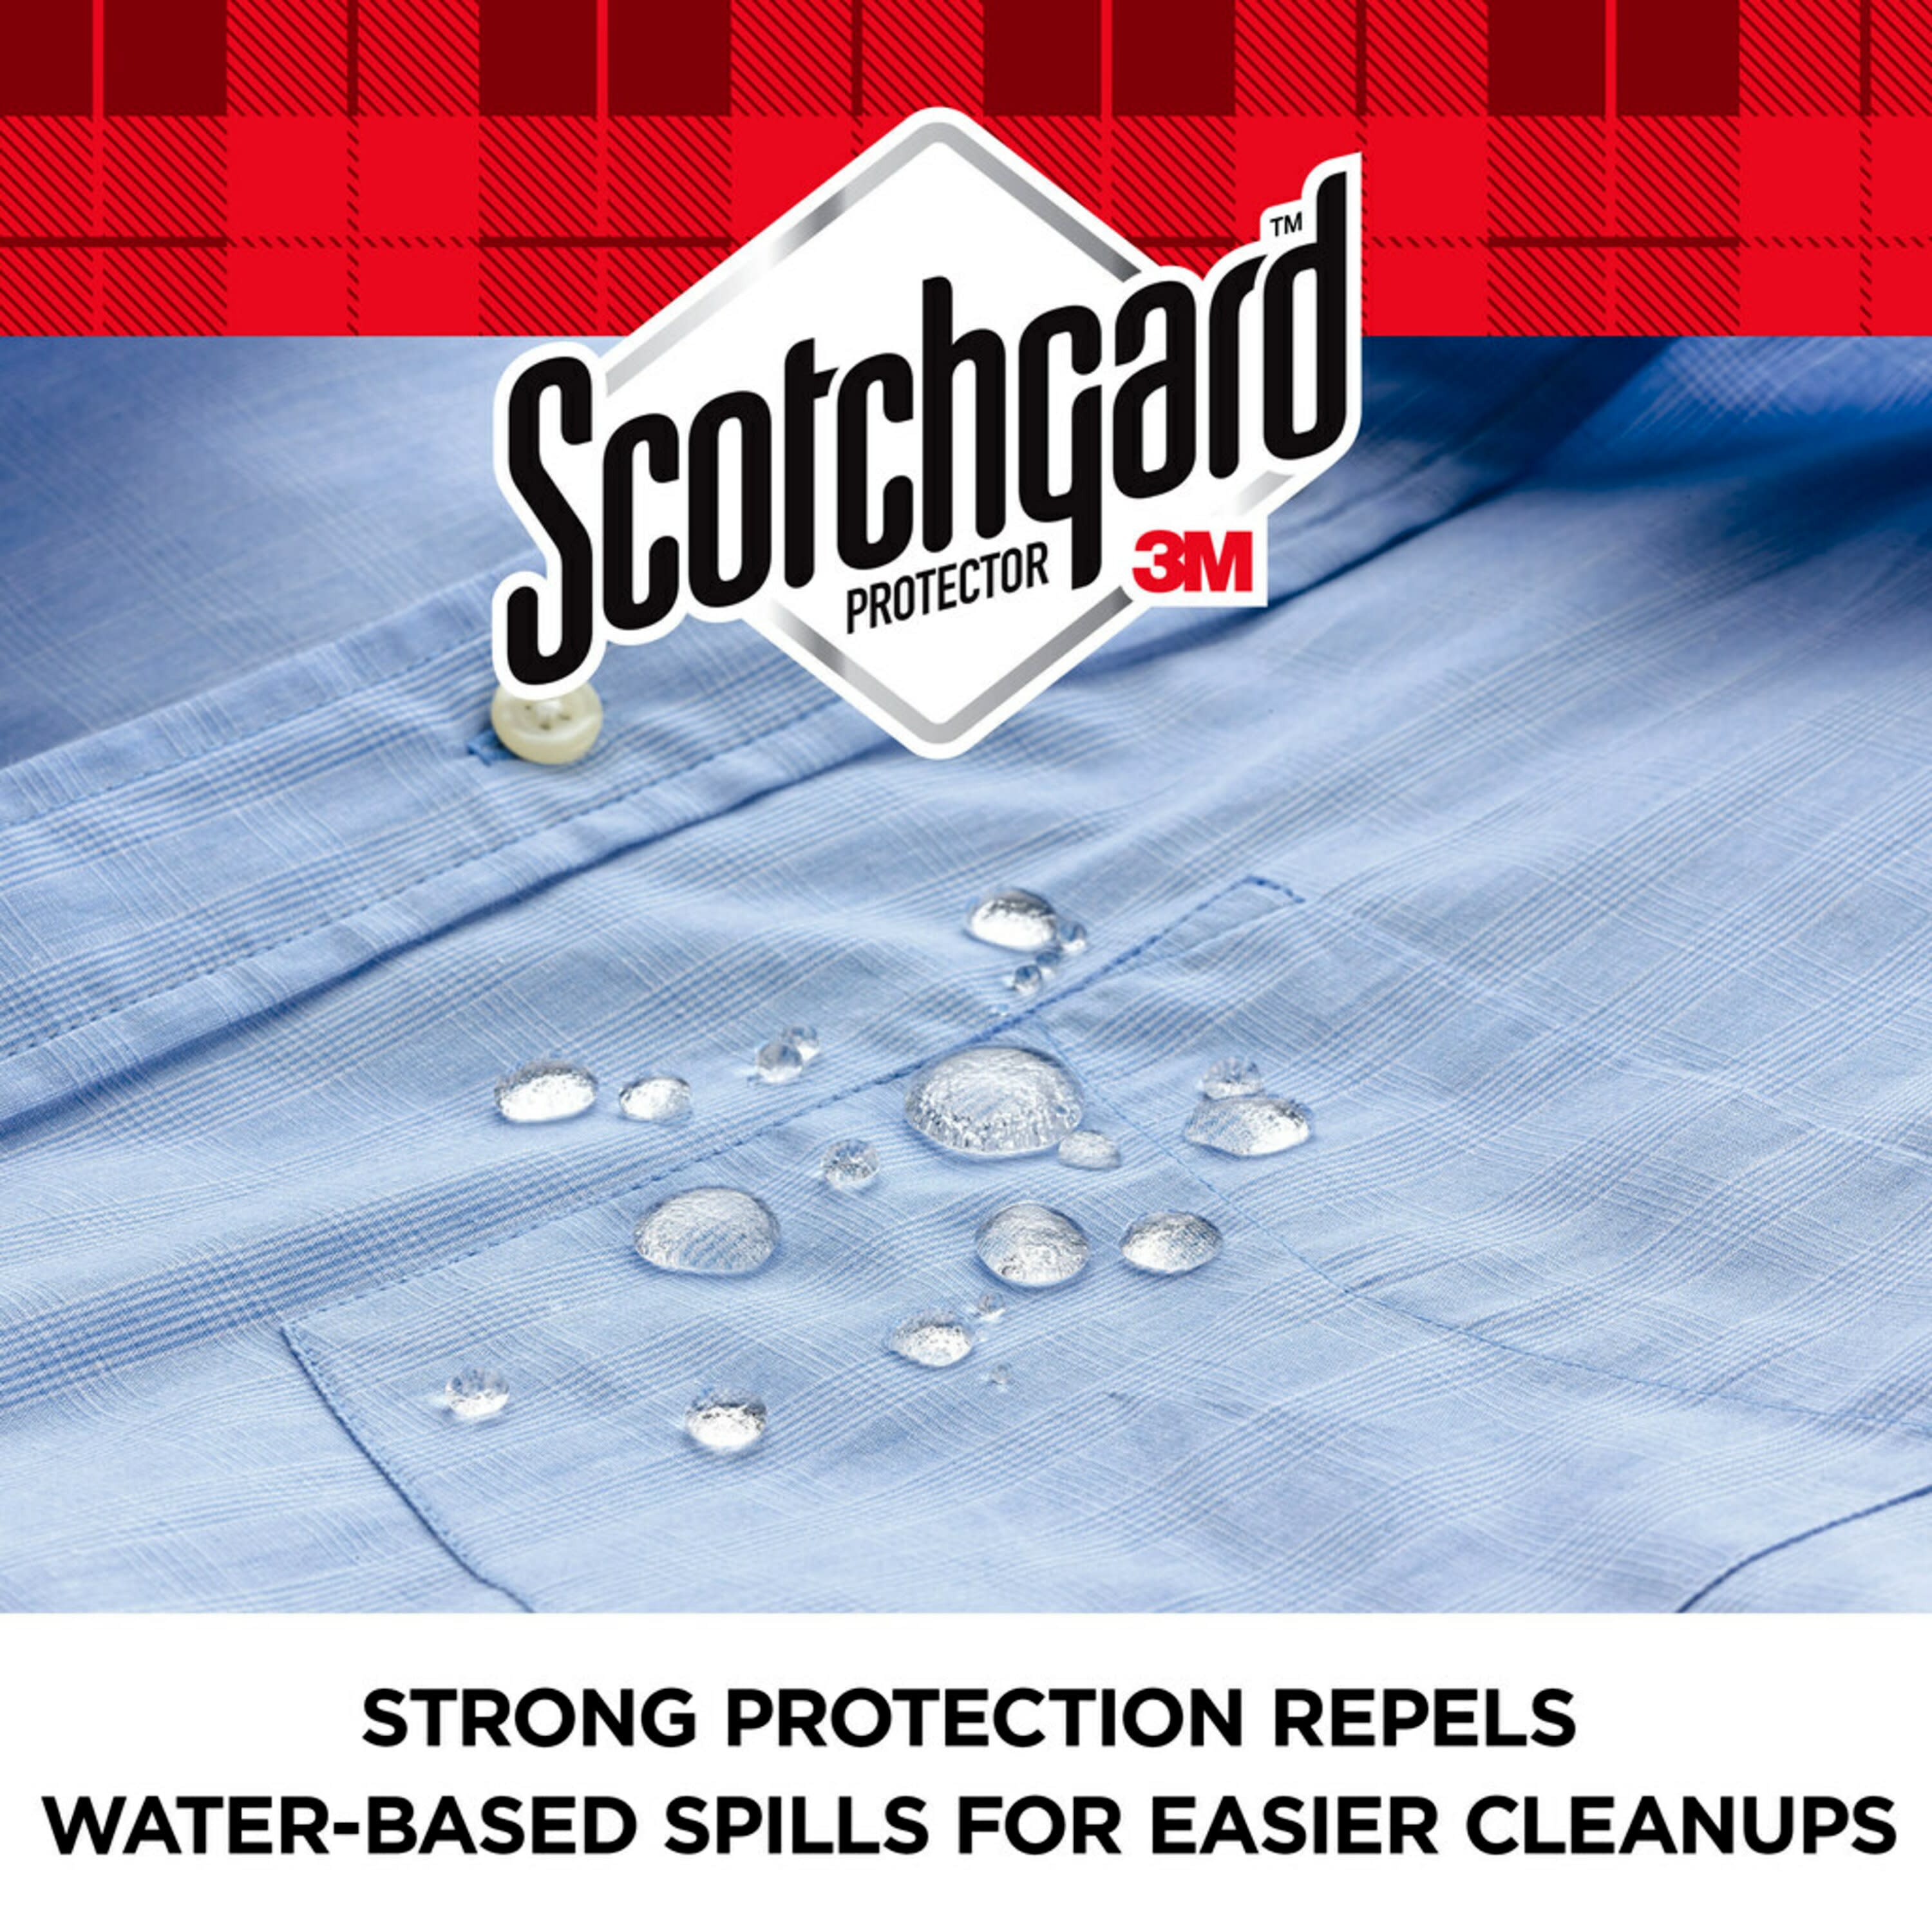 Scotchgard Scotchgard Water Shield 10-oz Fabric and Upholstery Protector  Spray in the Furniture & Upholstery Cleaners department at